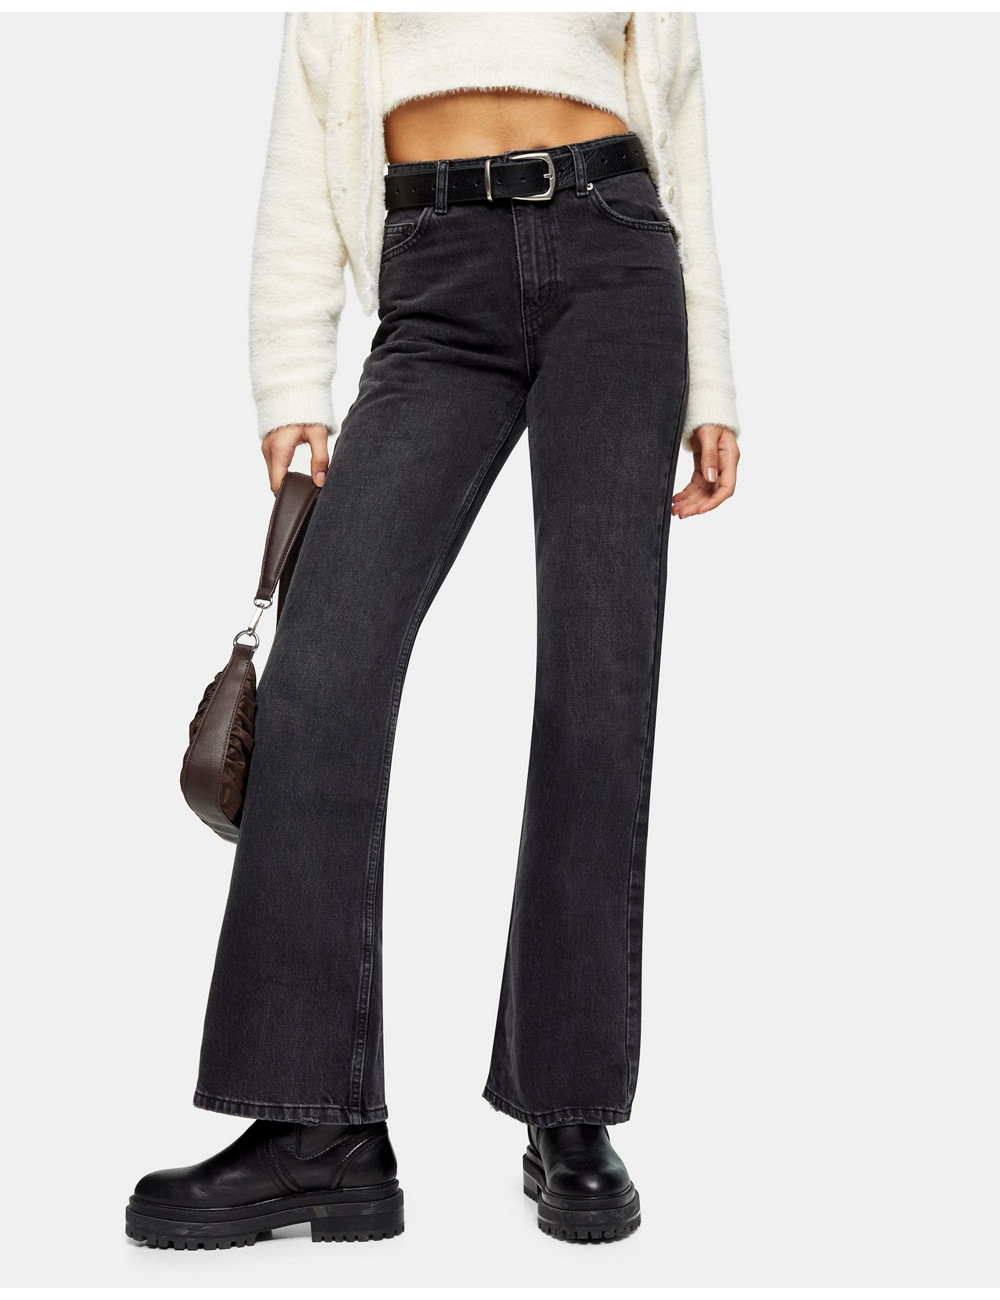 Topshop 90s flare jeans in...